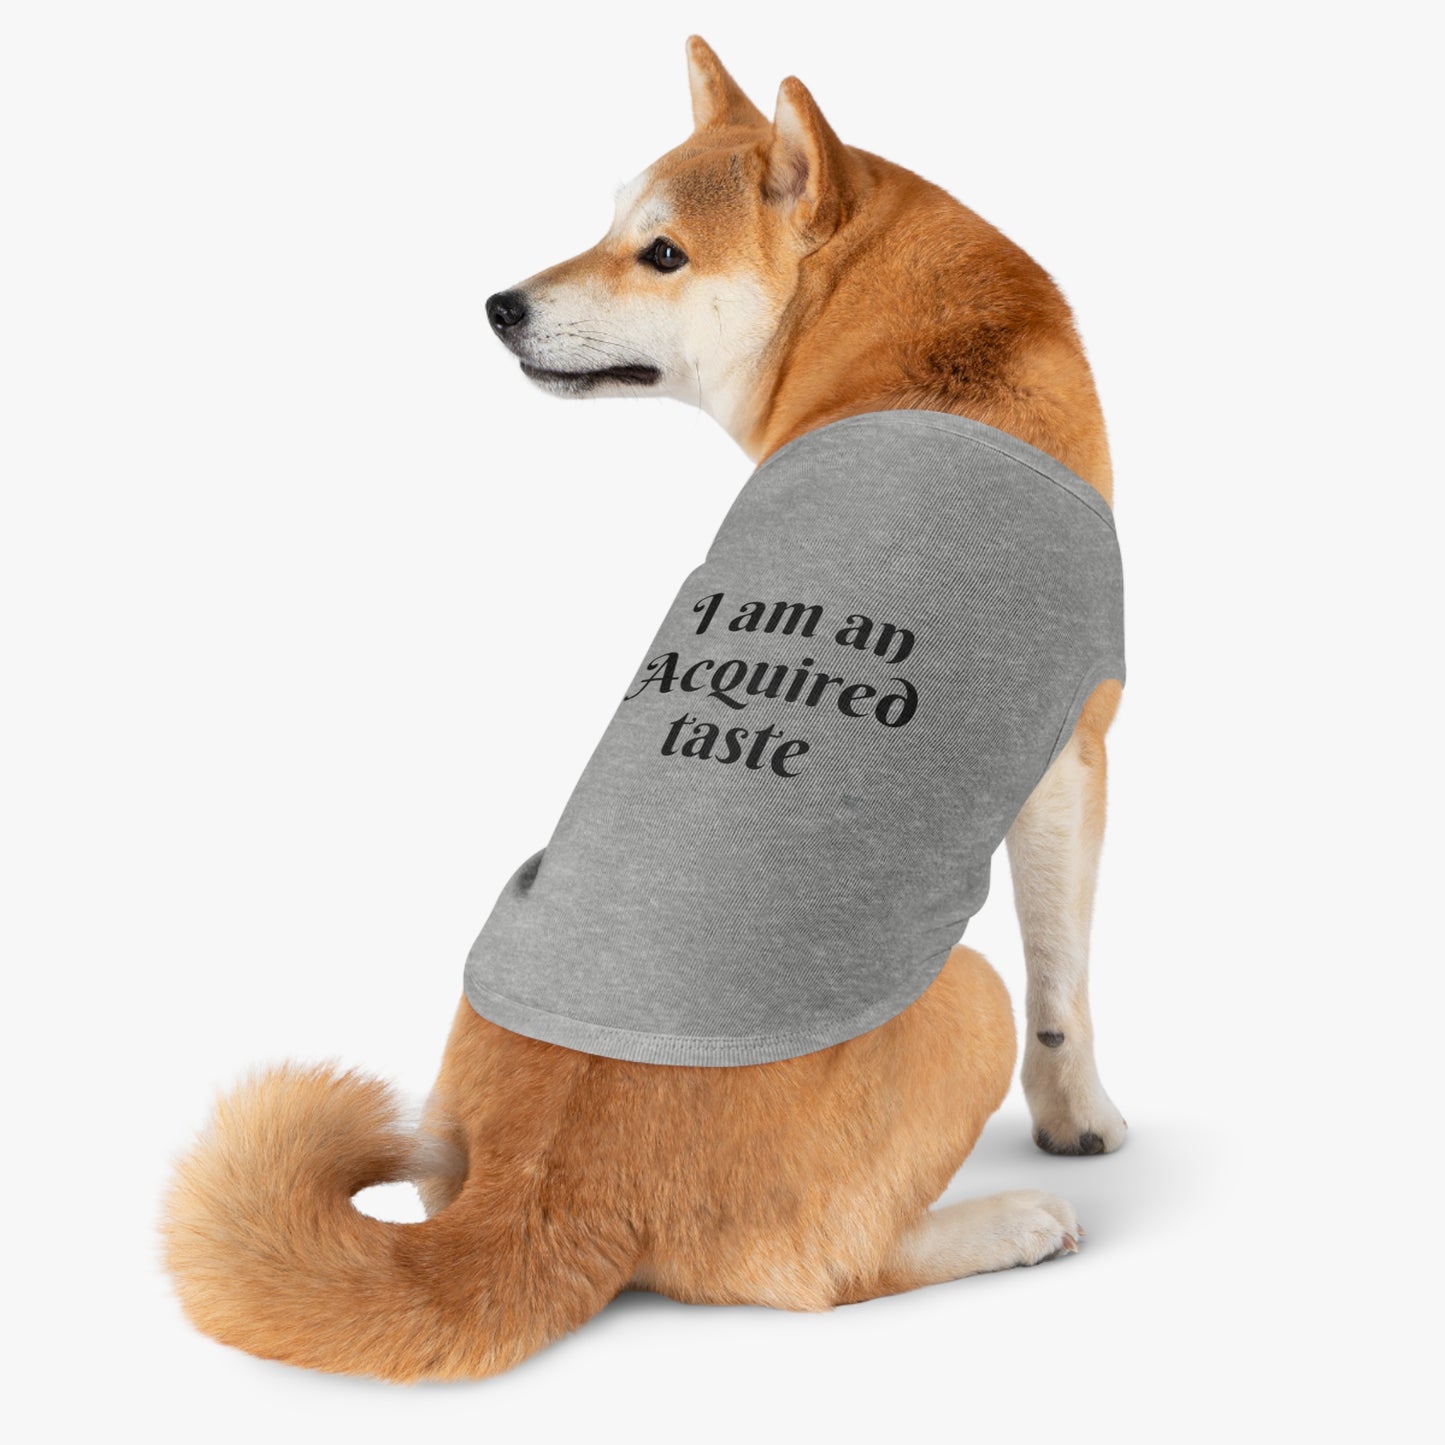 I'm an Acquired Taste Pet Tank Top - Unique and Expressive Pet Apparel